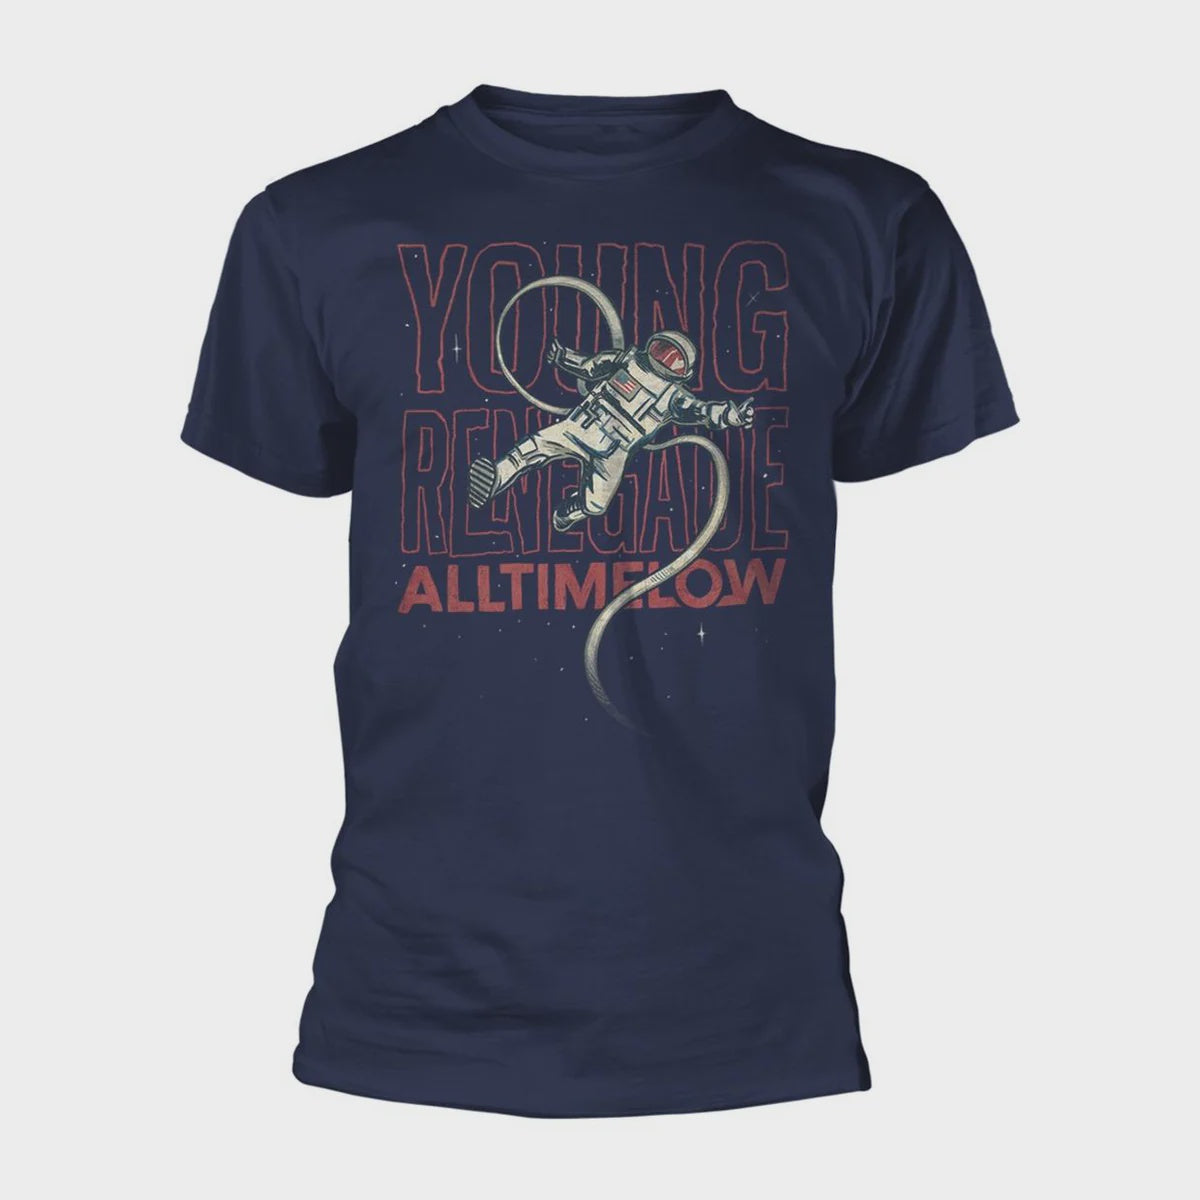 All Time Low - Astronaut Renegade T-shirt